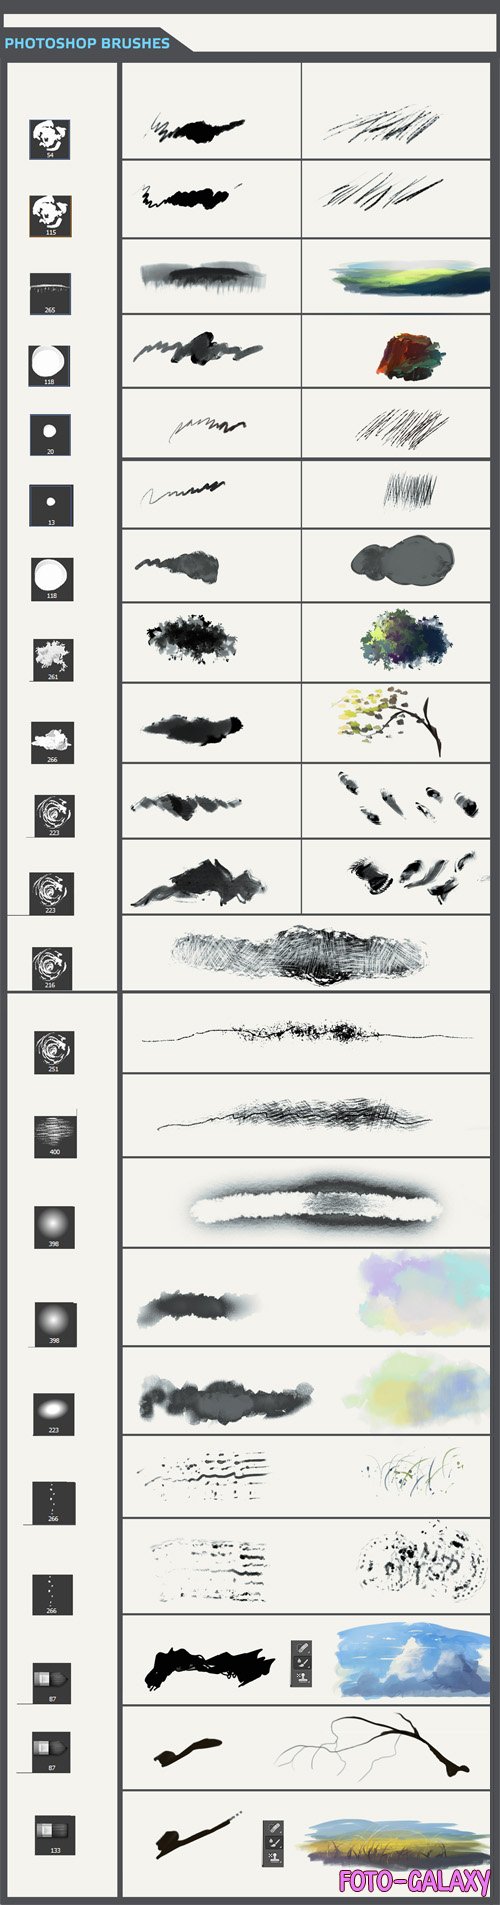 Nature - Brushes Pack for Photoshop